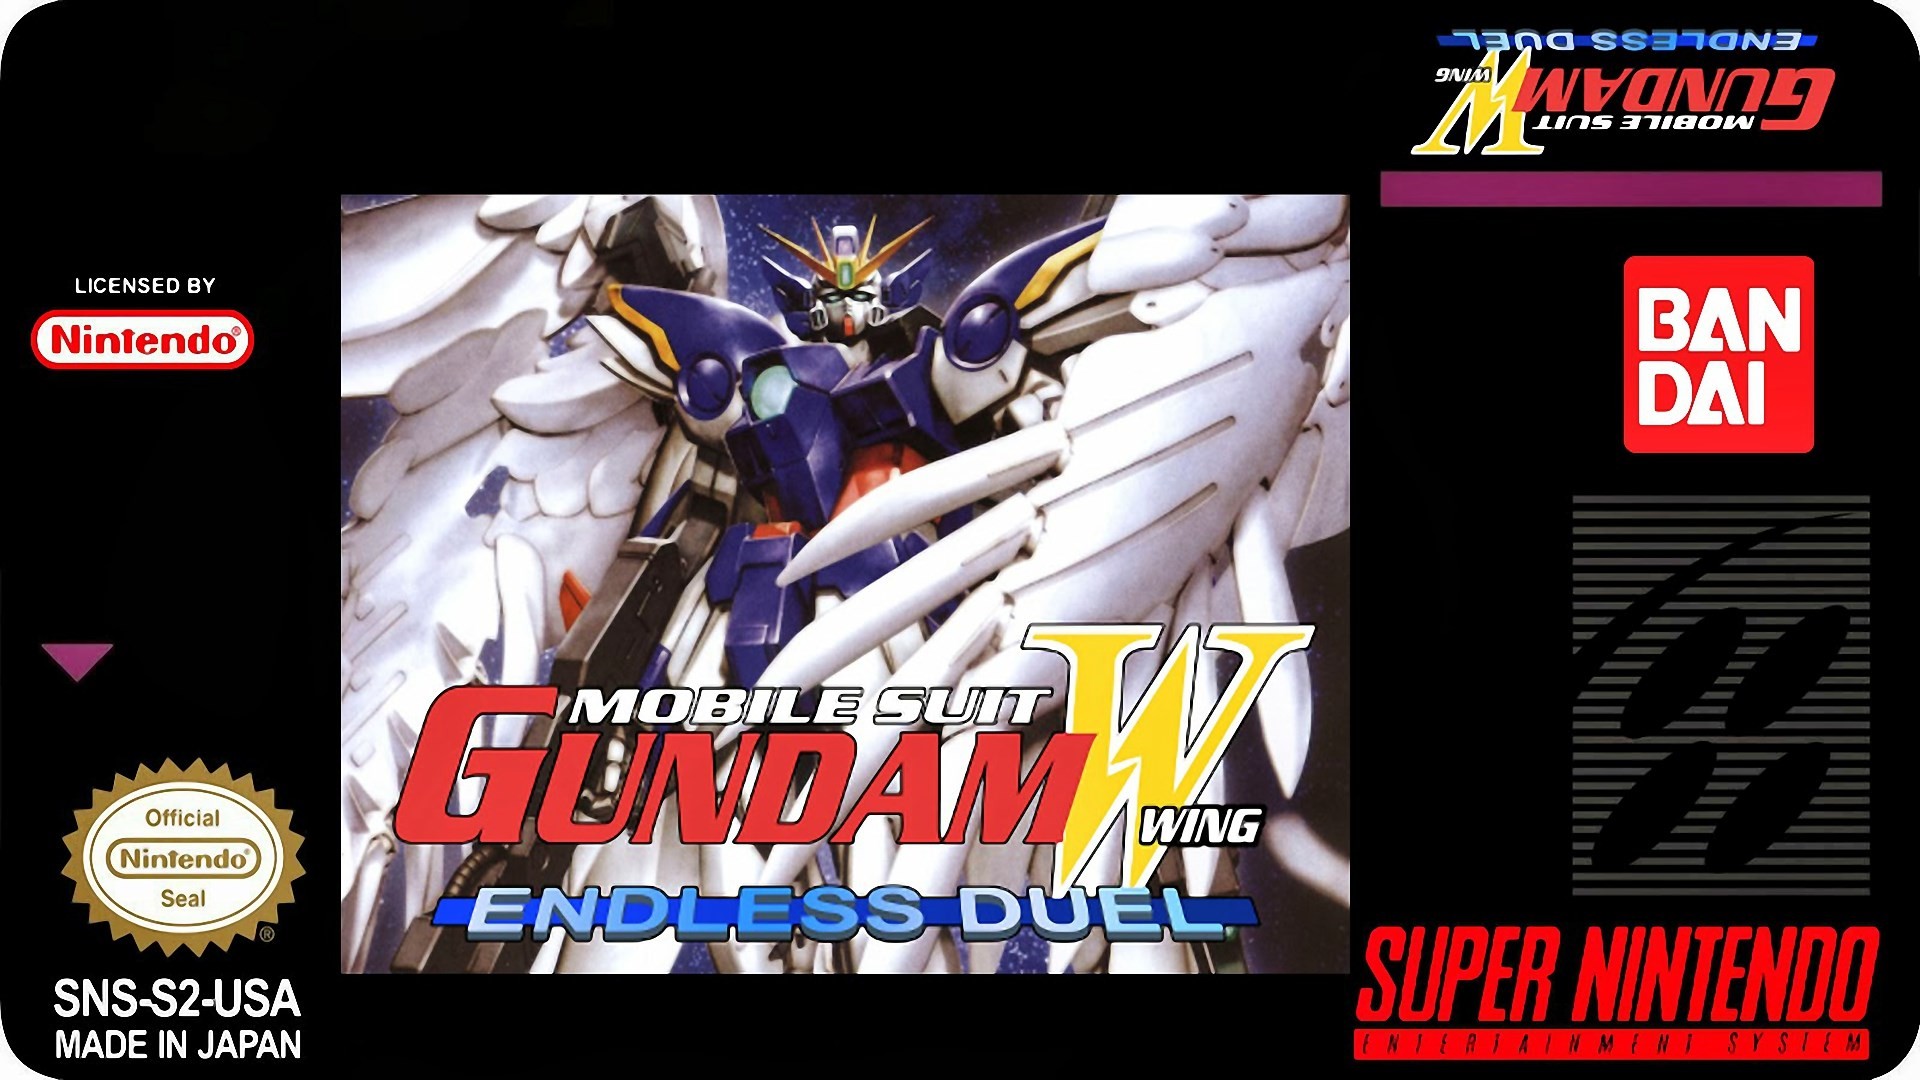 1920x1080 free screensaver wallpapers for gundam wing endless duel,  (333 kB)